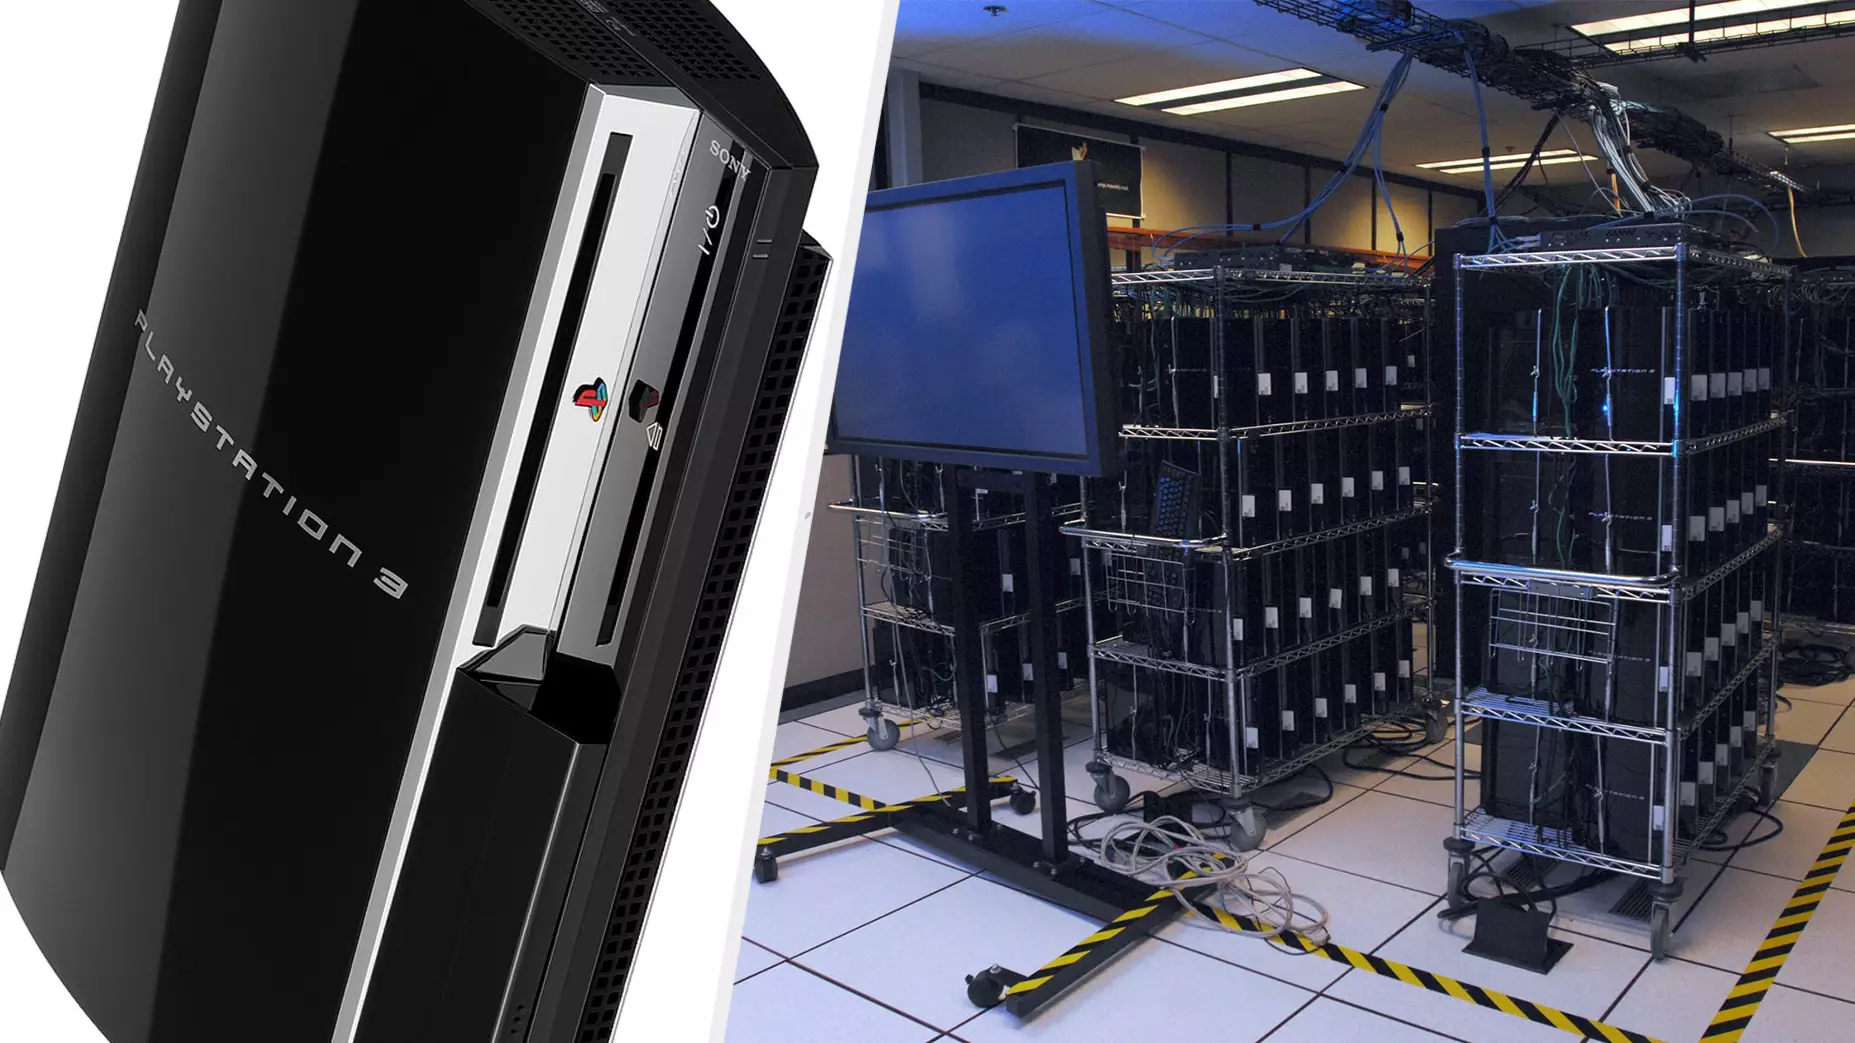 Did You Know The US Air Force Built A Supercomputer Out Of PS3s?